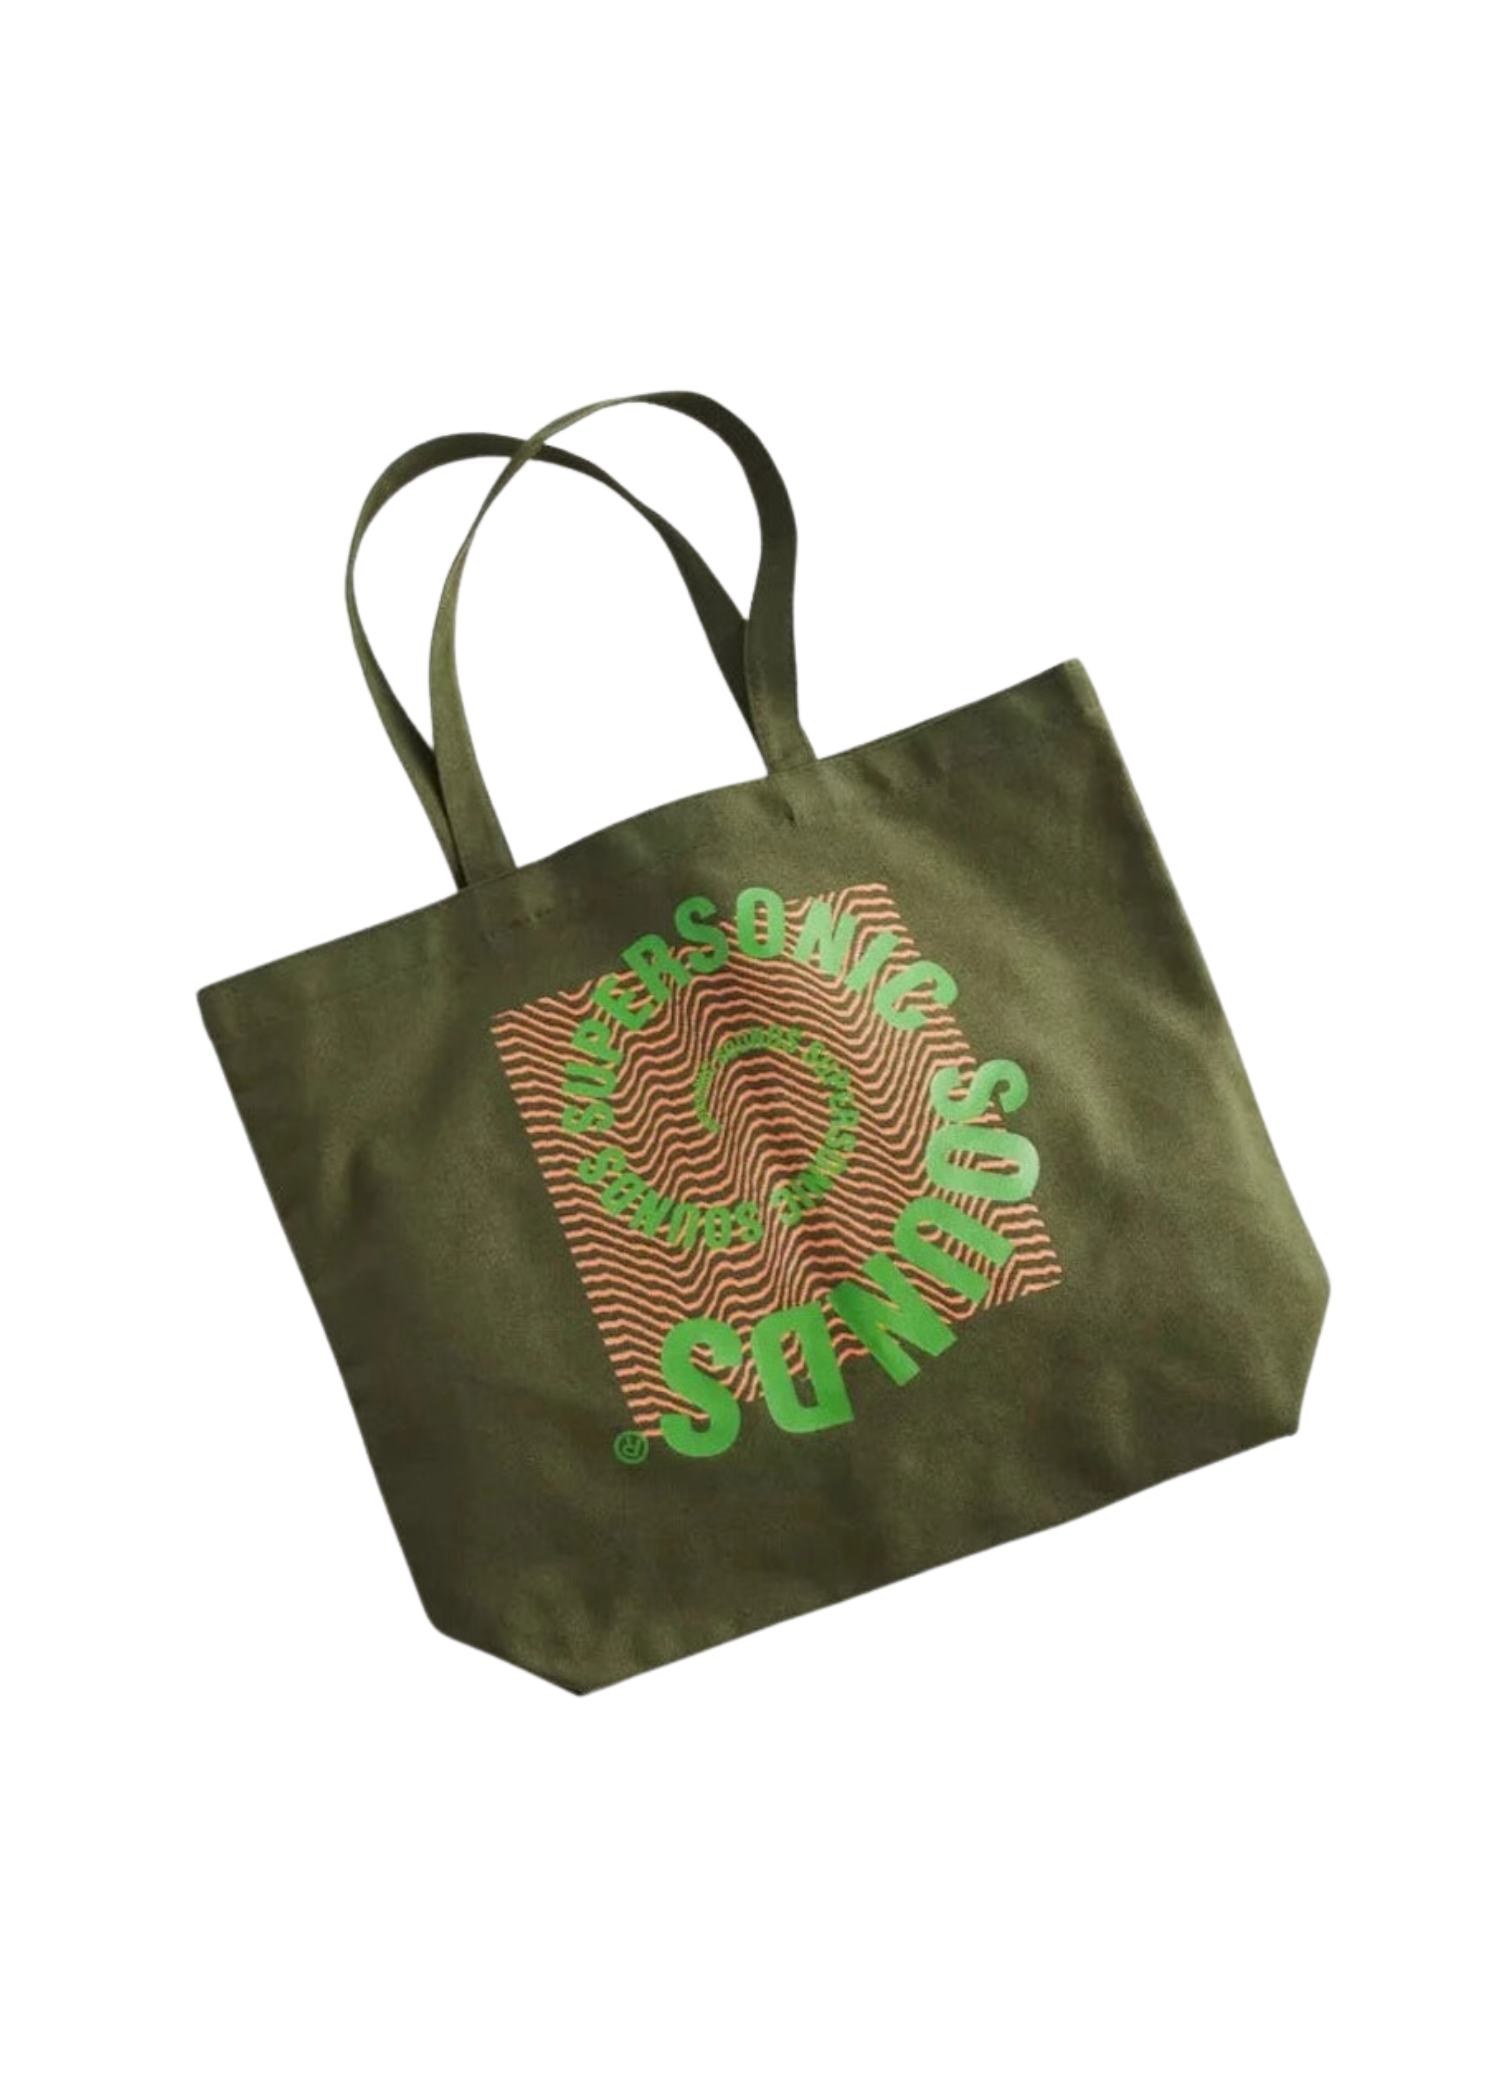 Supersonic Sounds Tote Bag